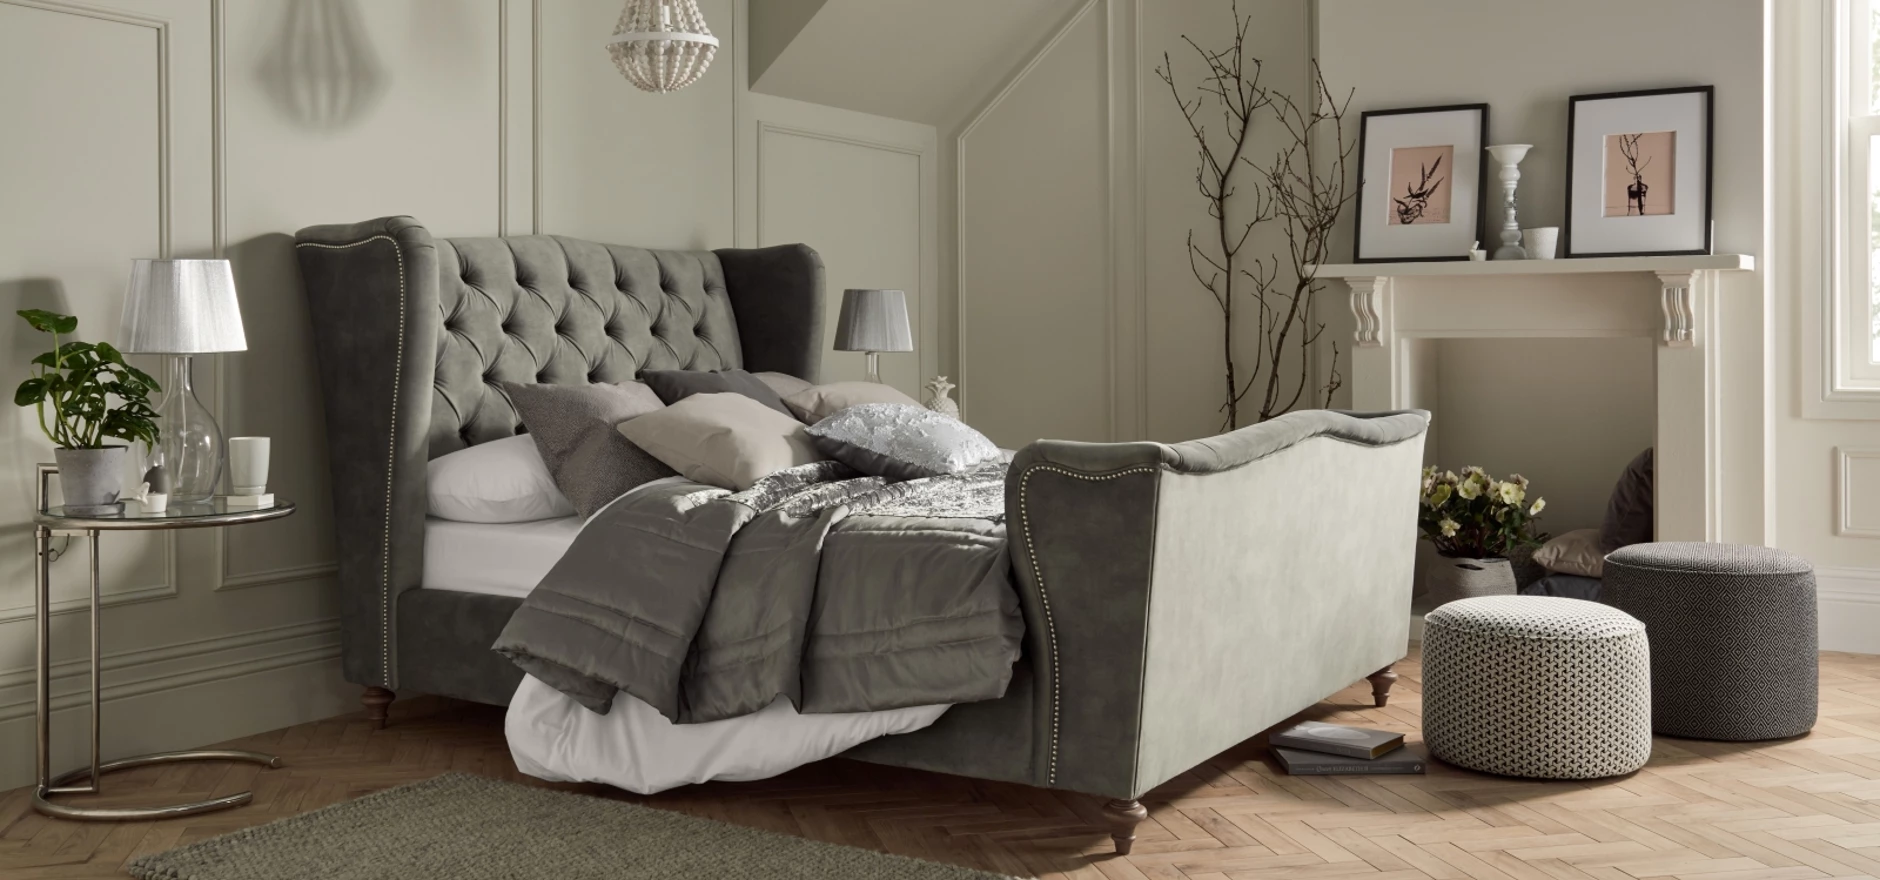 Bed from Arighi Bianchi